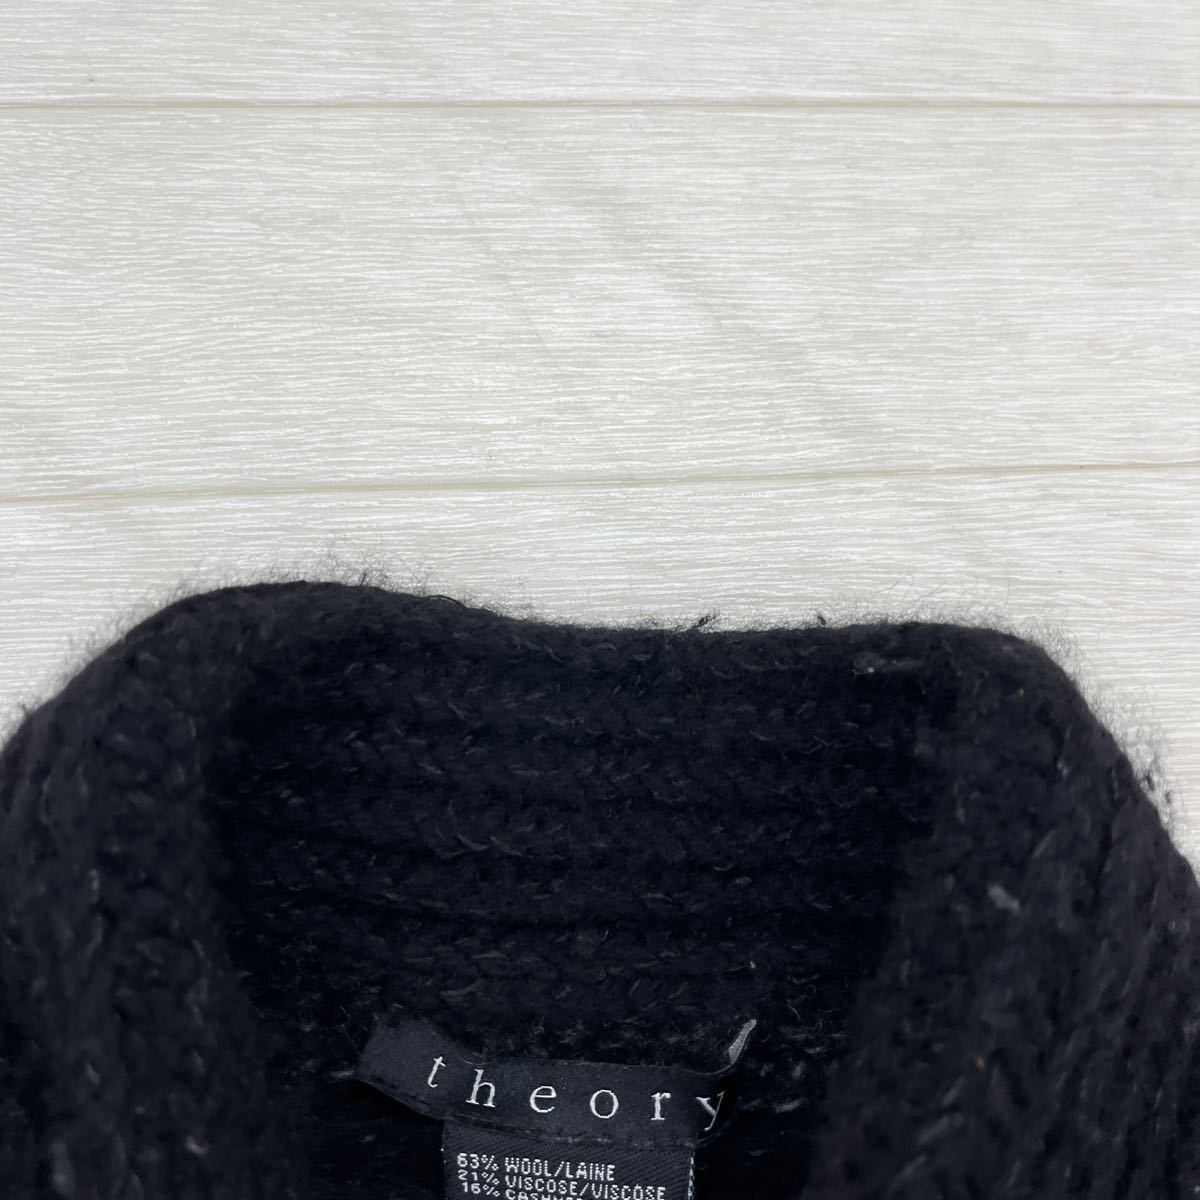 1312* theory theory tops knitted coat long height long sleeve fulvic tongue border cashmere mixing casual black lady's P/TP